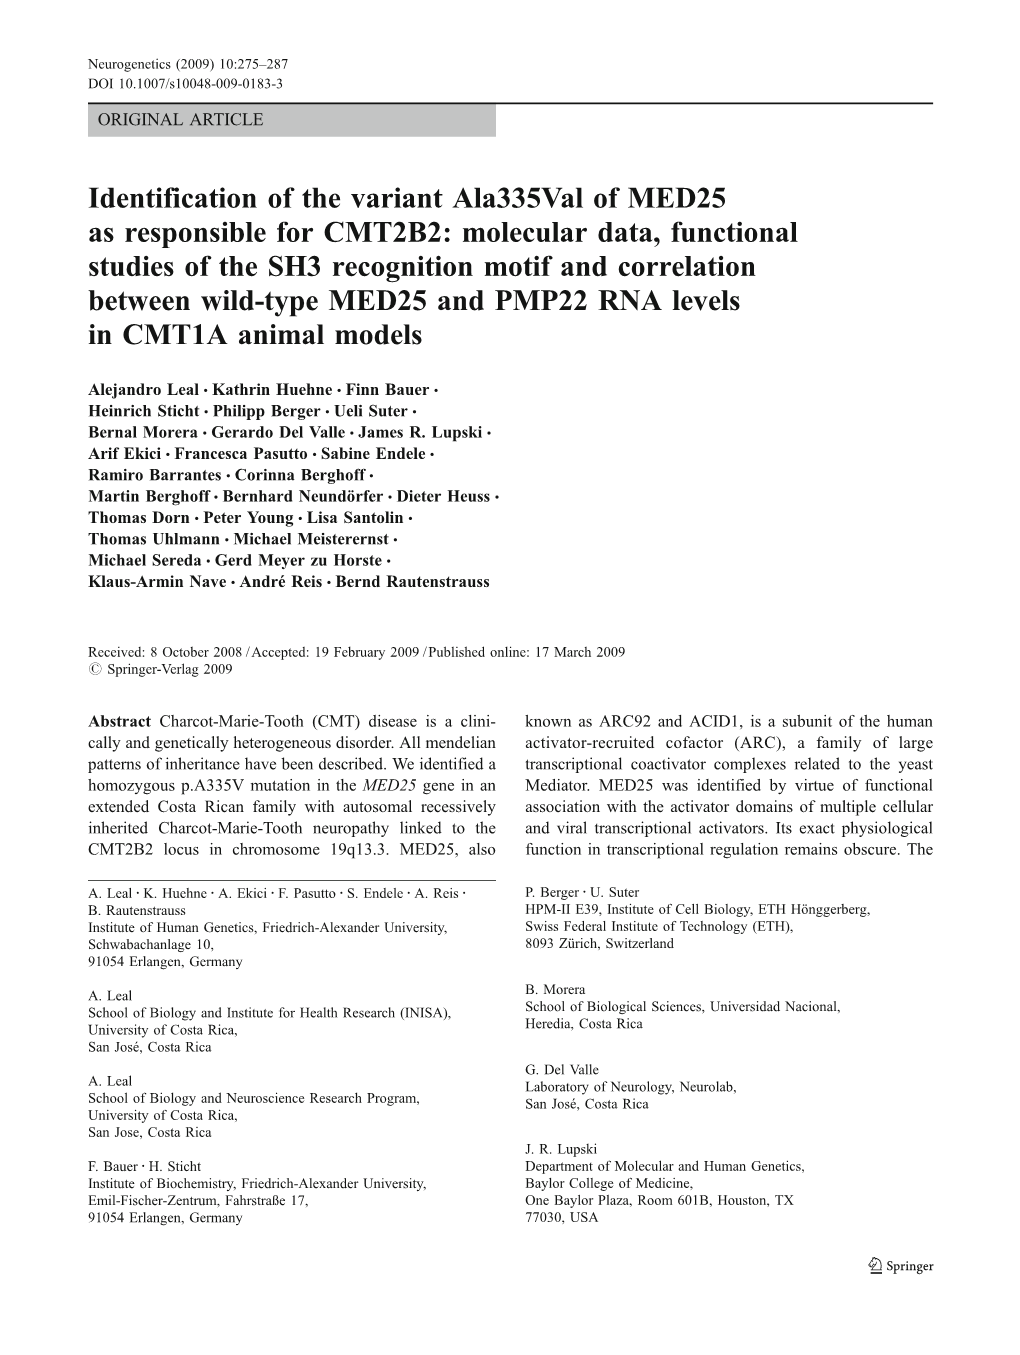 Molecular Data, Functional Studies of the SH3 Recognition Motif and Correlation Between Wild-Type MED25 and PMP22 RNA Levels in CMT1A Animal Models